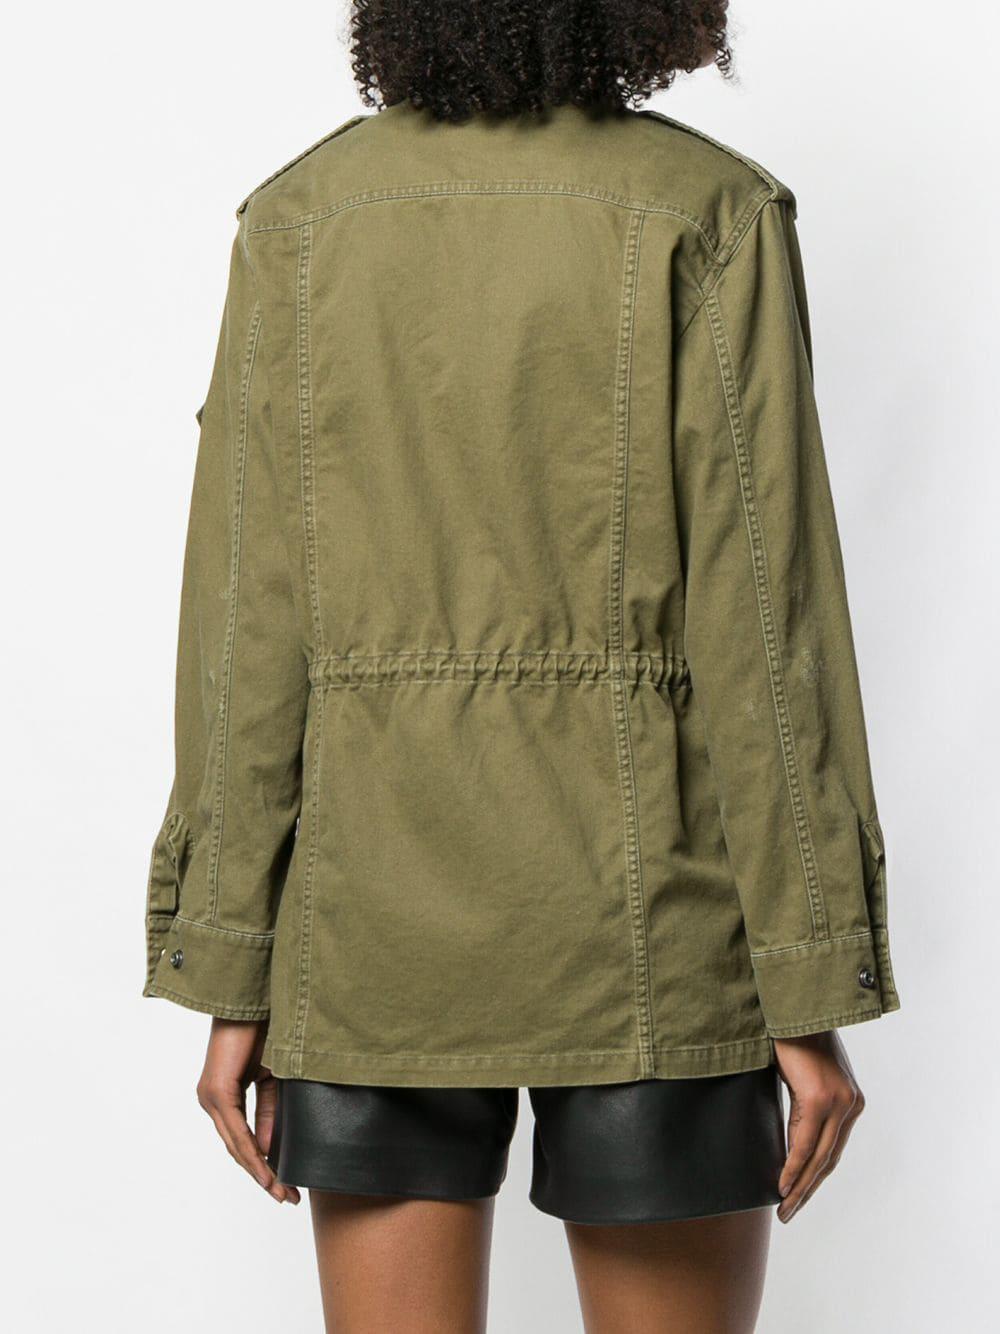 WOMEN'S MILITARY JACKET ARMY GREEN SCARS